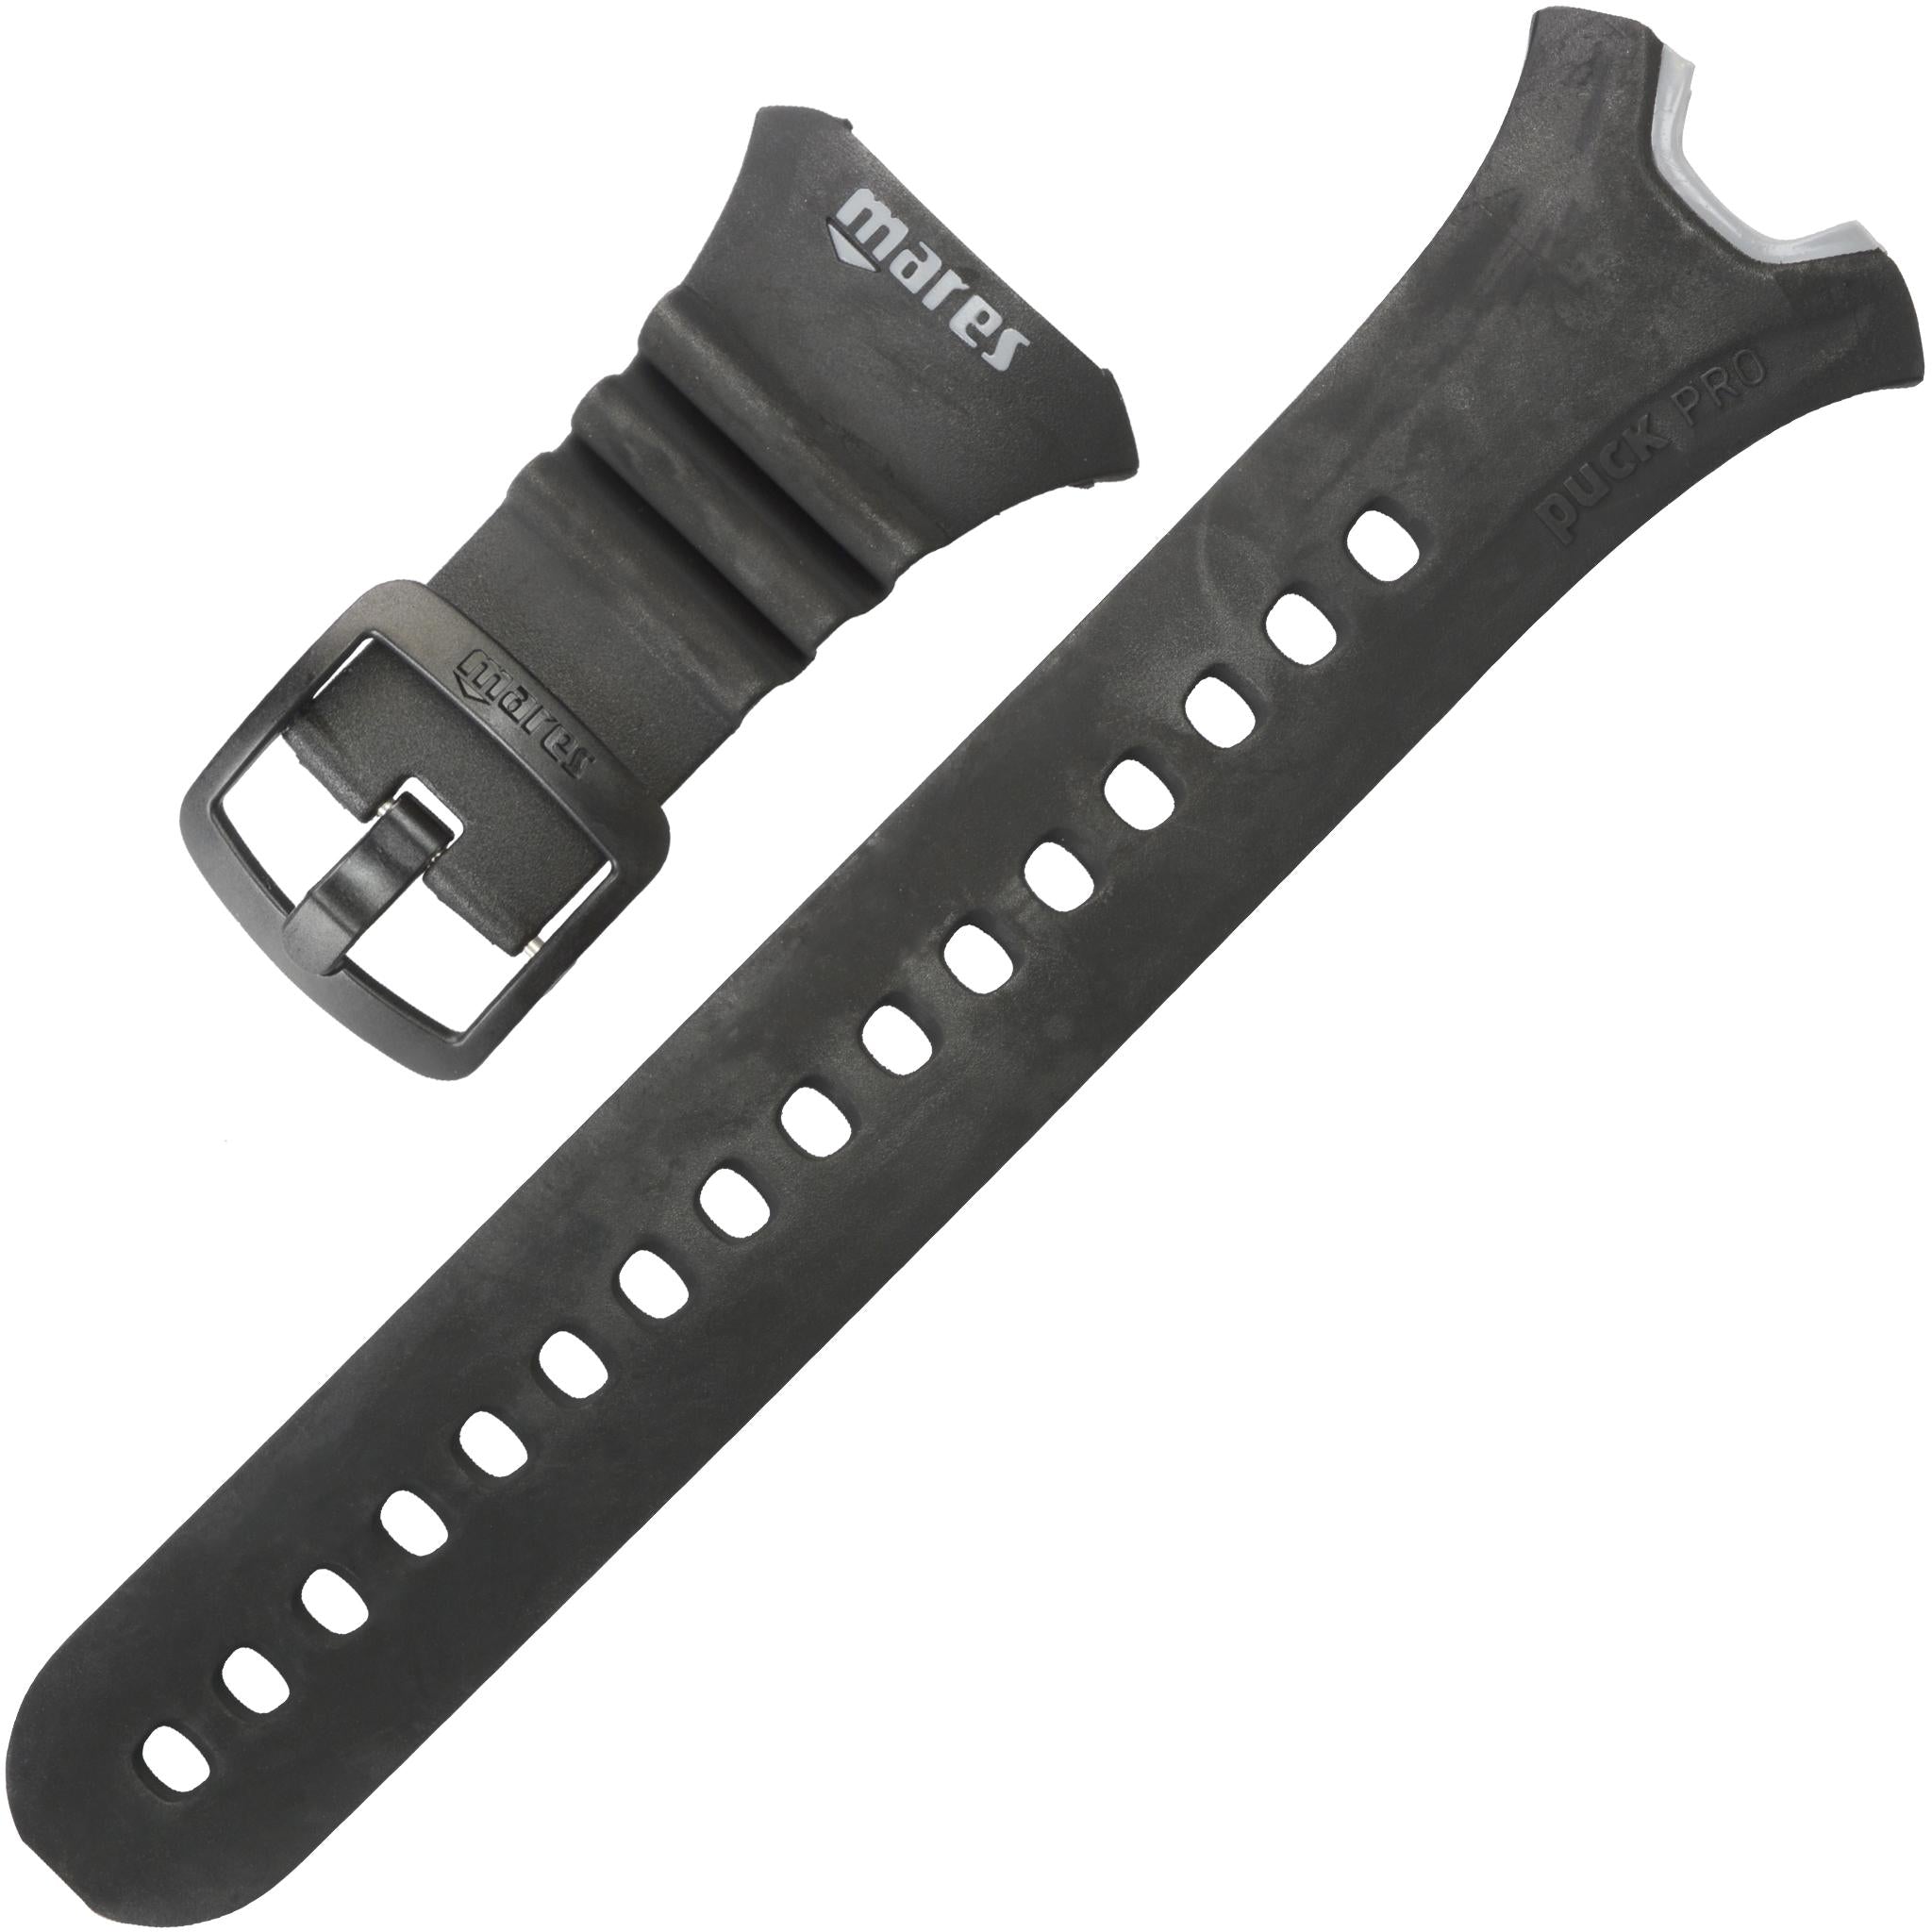 Mares Puck Pro Replacement Wrist Strap